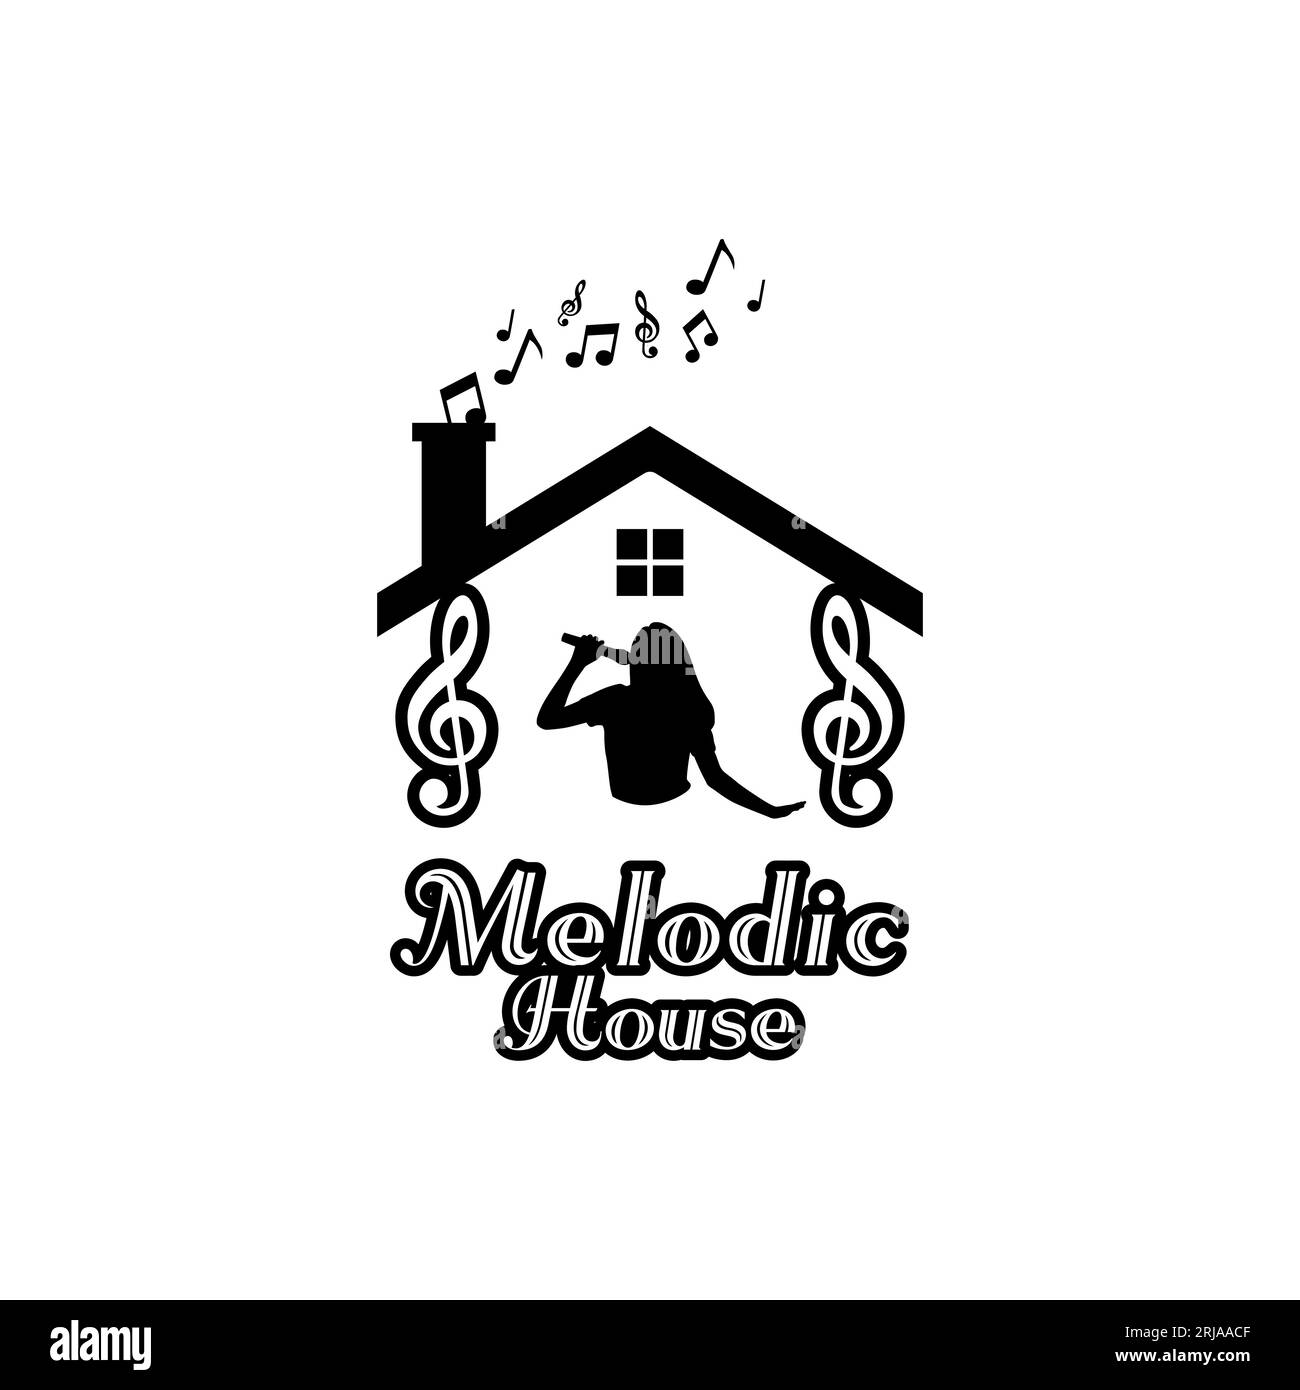 Karaoke House Logo With Silhouette Of Woman Singing And Tone Stock Vector